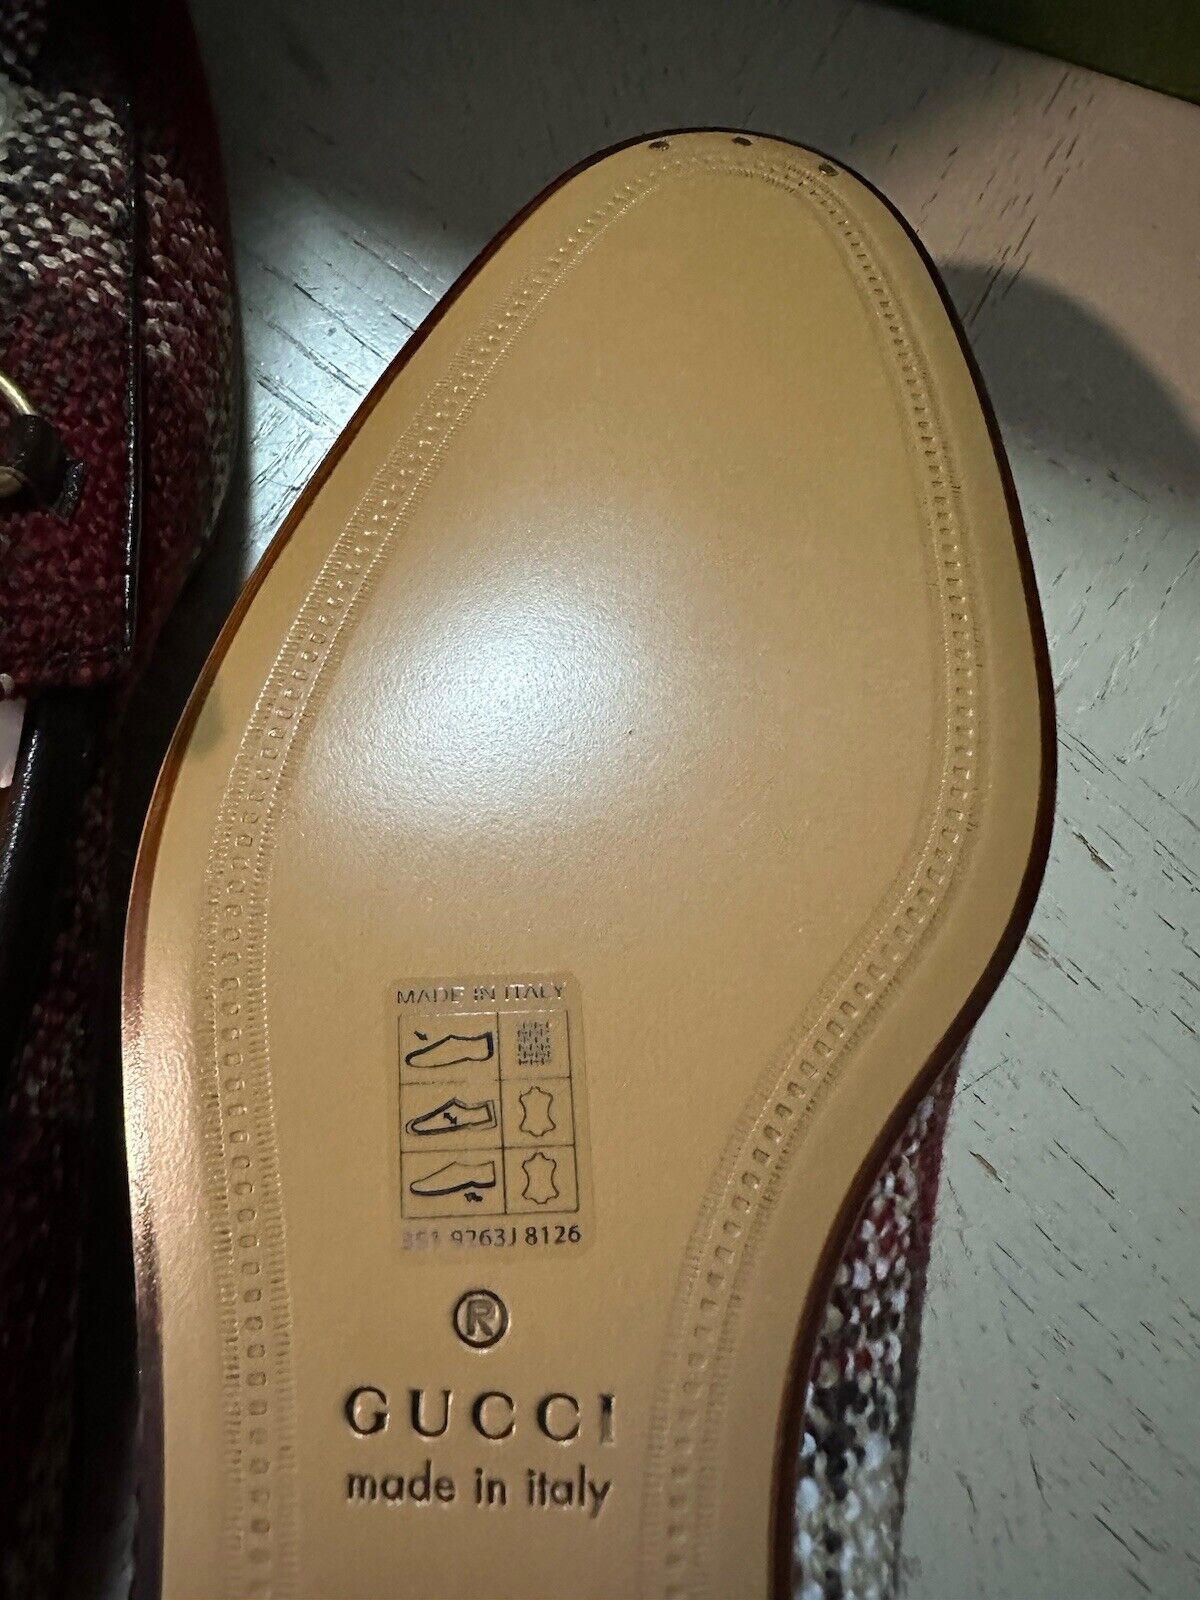 Gucci Mens Loafers Moccasin Shoes Red/Cocoa/Mul 10.5 US/9.5 UK 430088 New $920